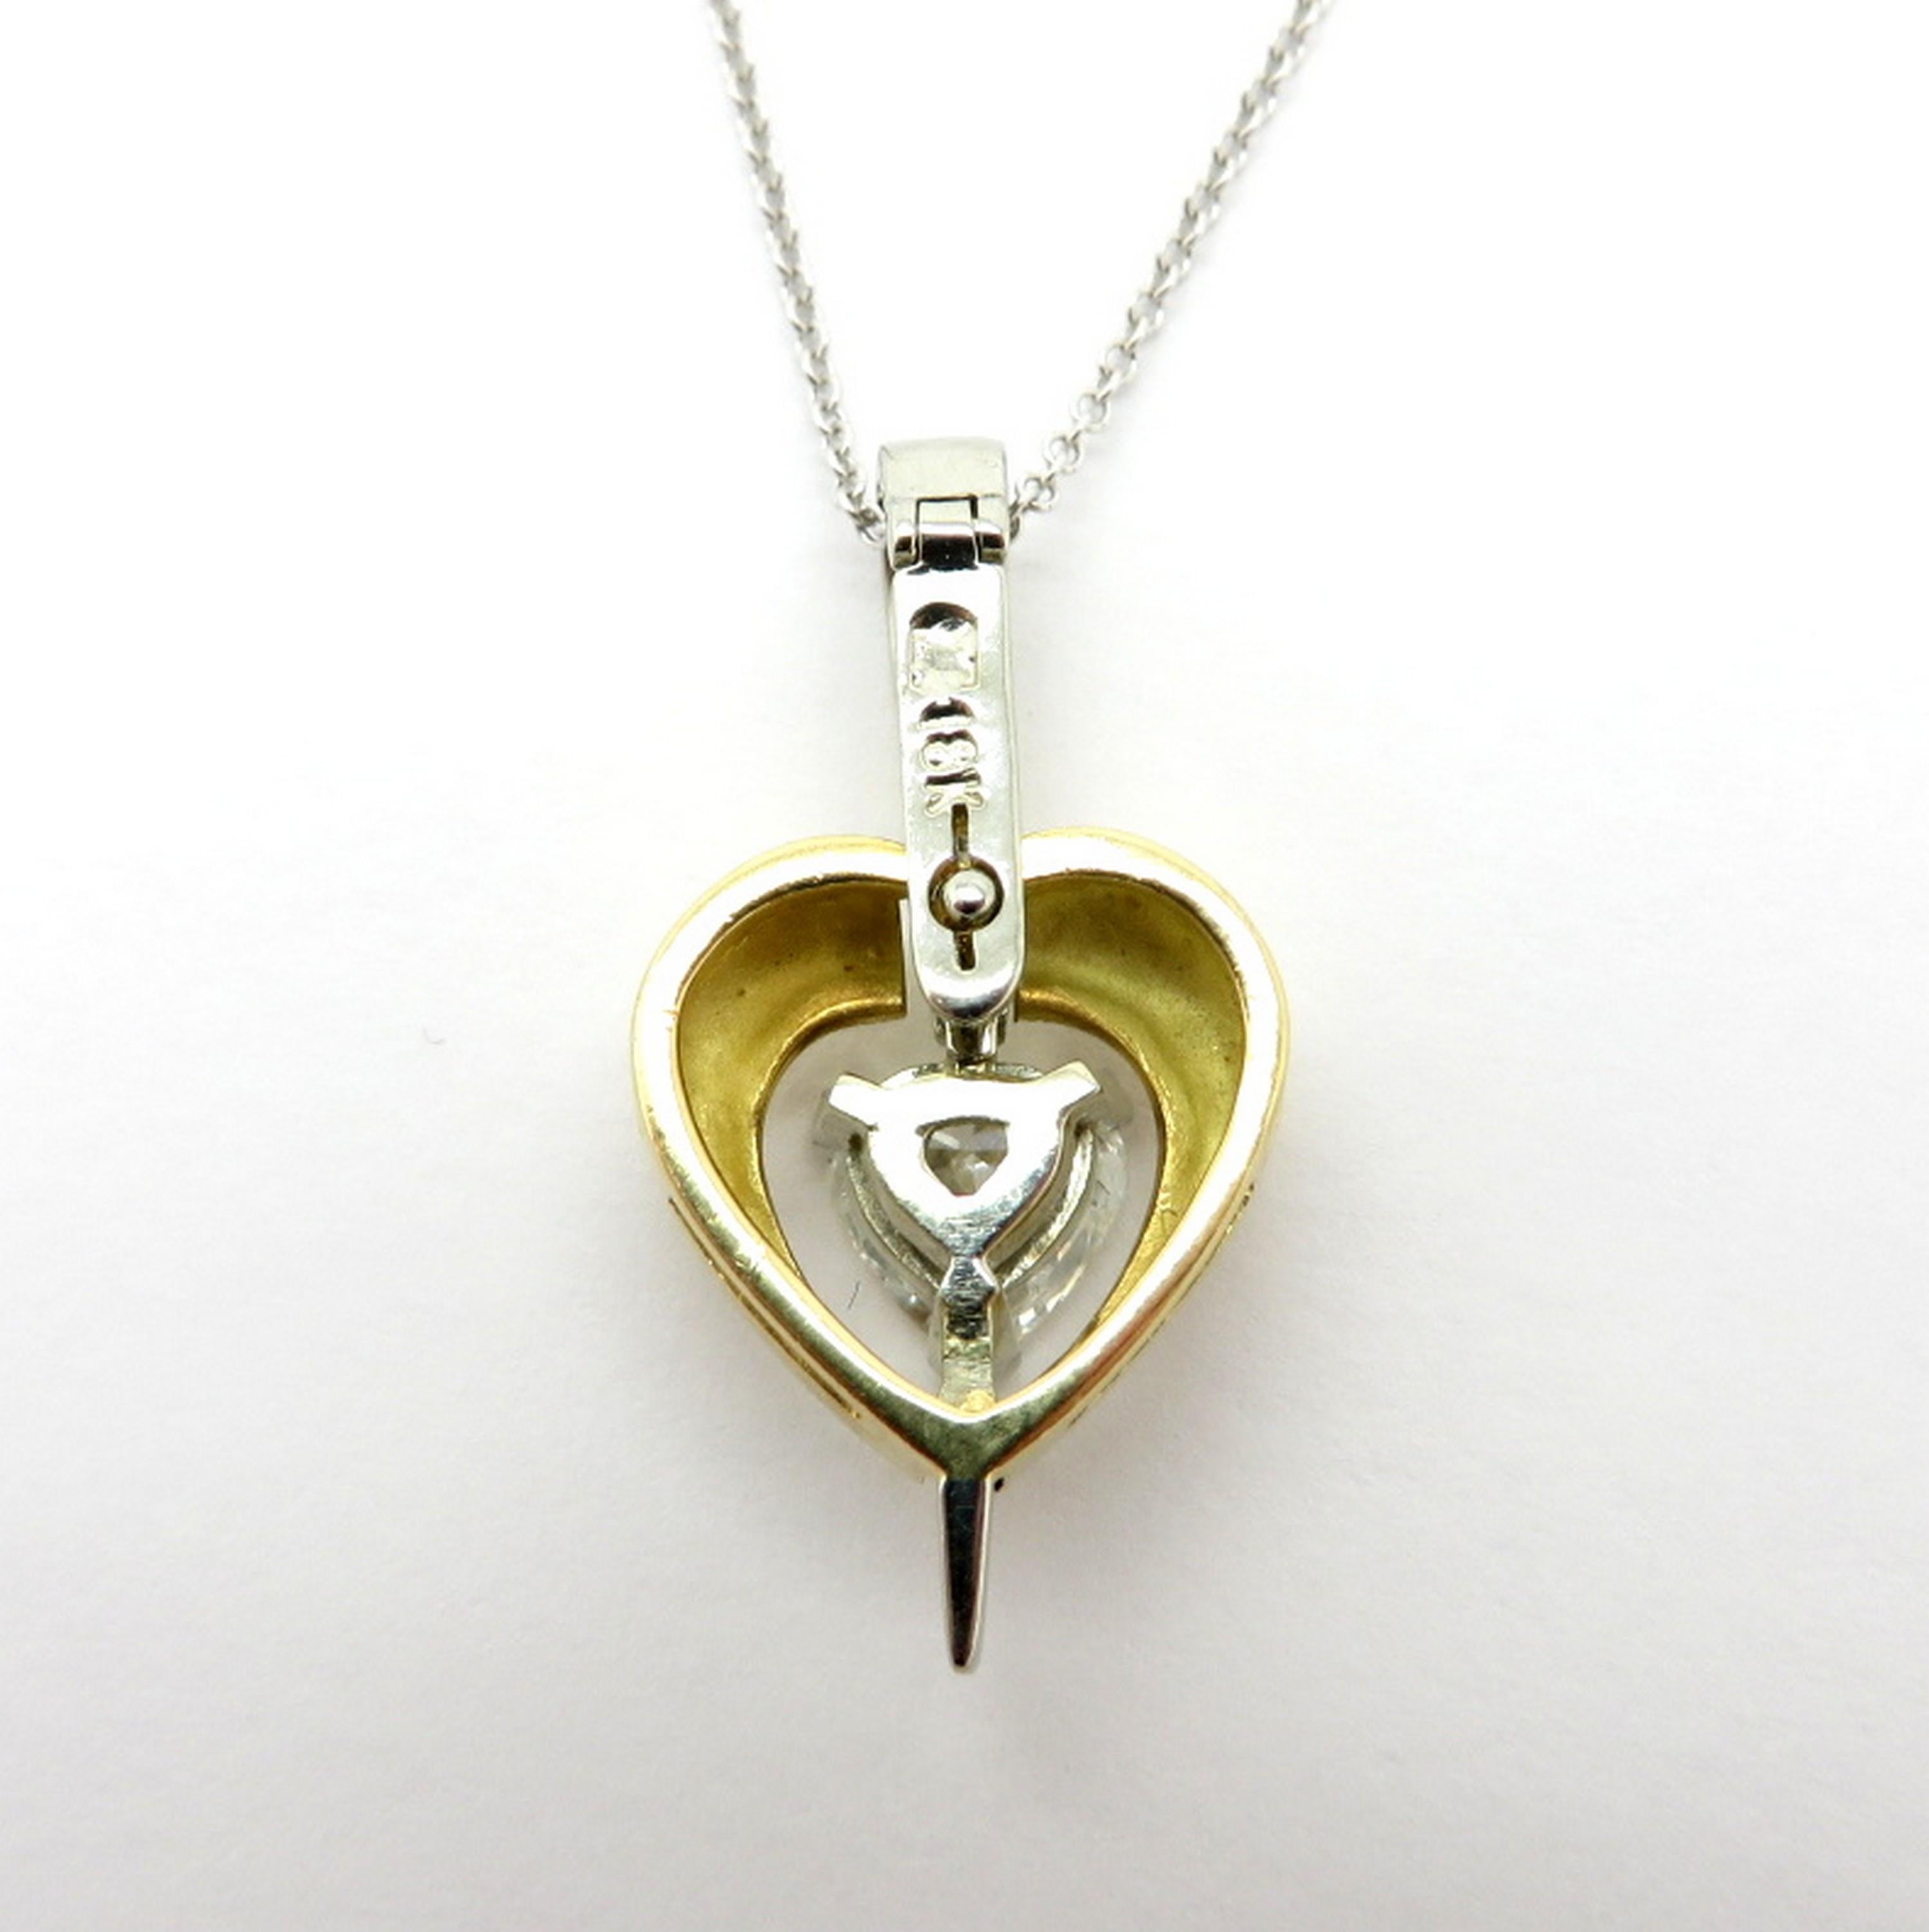 Estate 18 Karat Two-Tone Gold Diamond Fashion Heart Shaped Pendant Necklace In Excellent Condition For Sale In Scottsdale, AZ